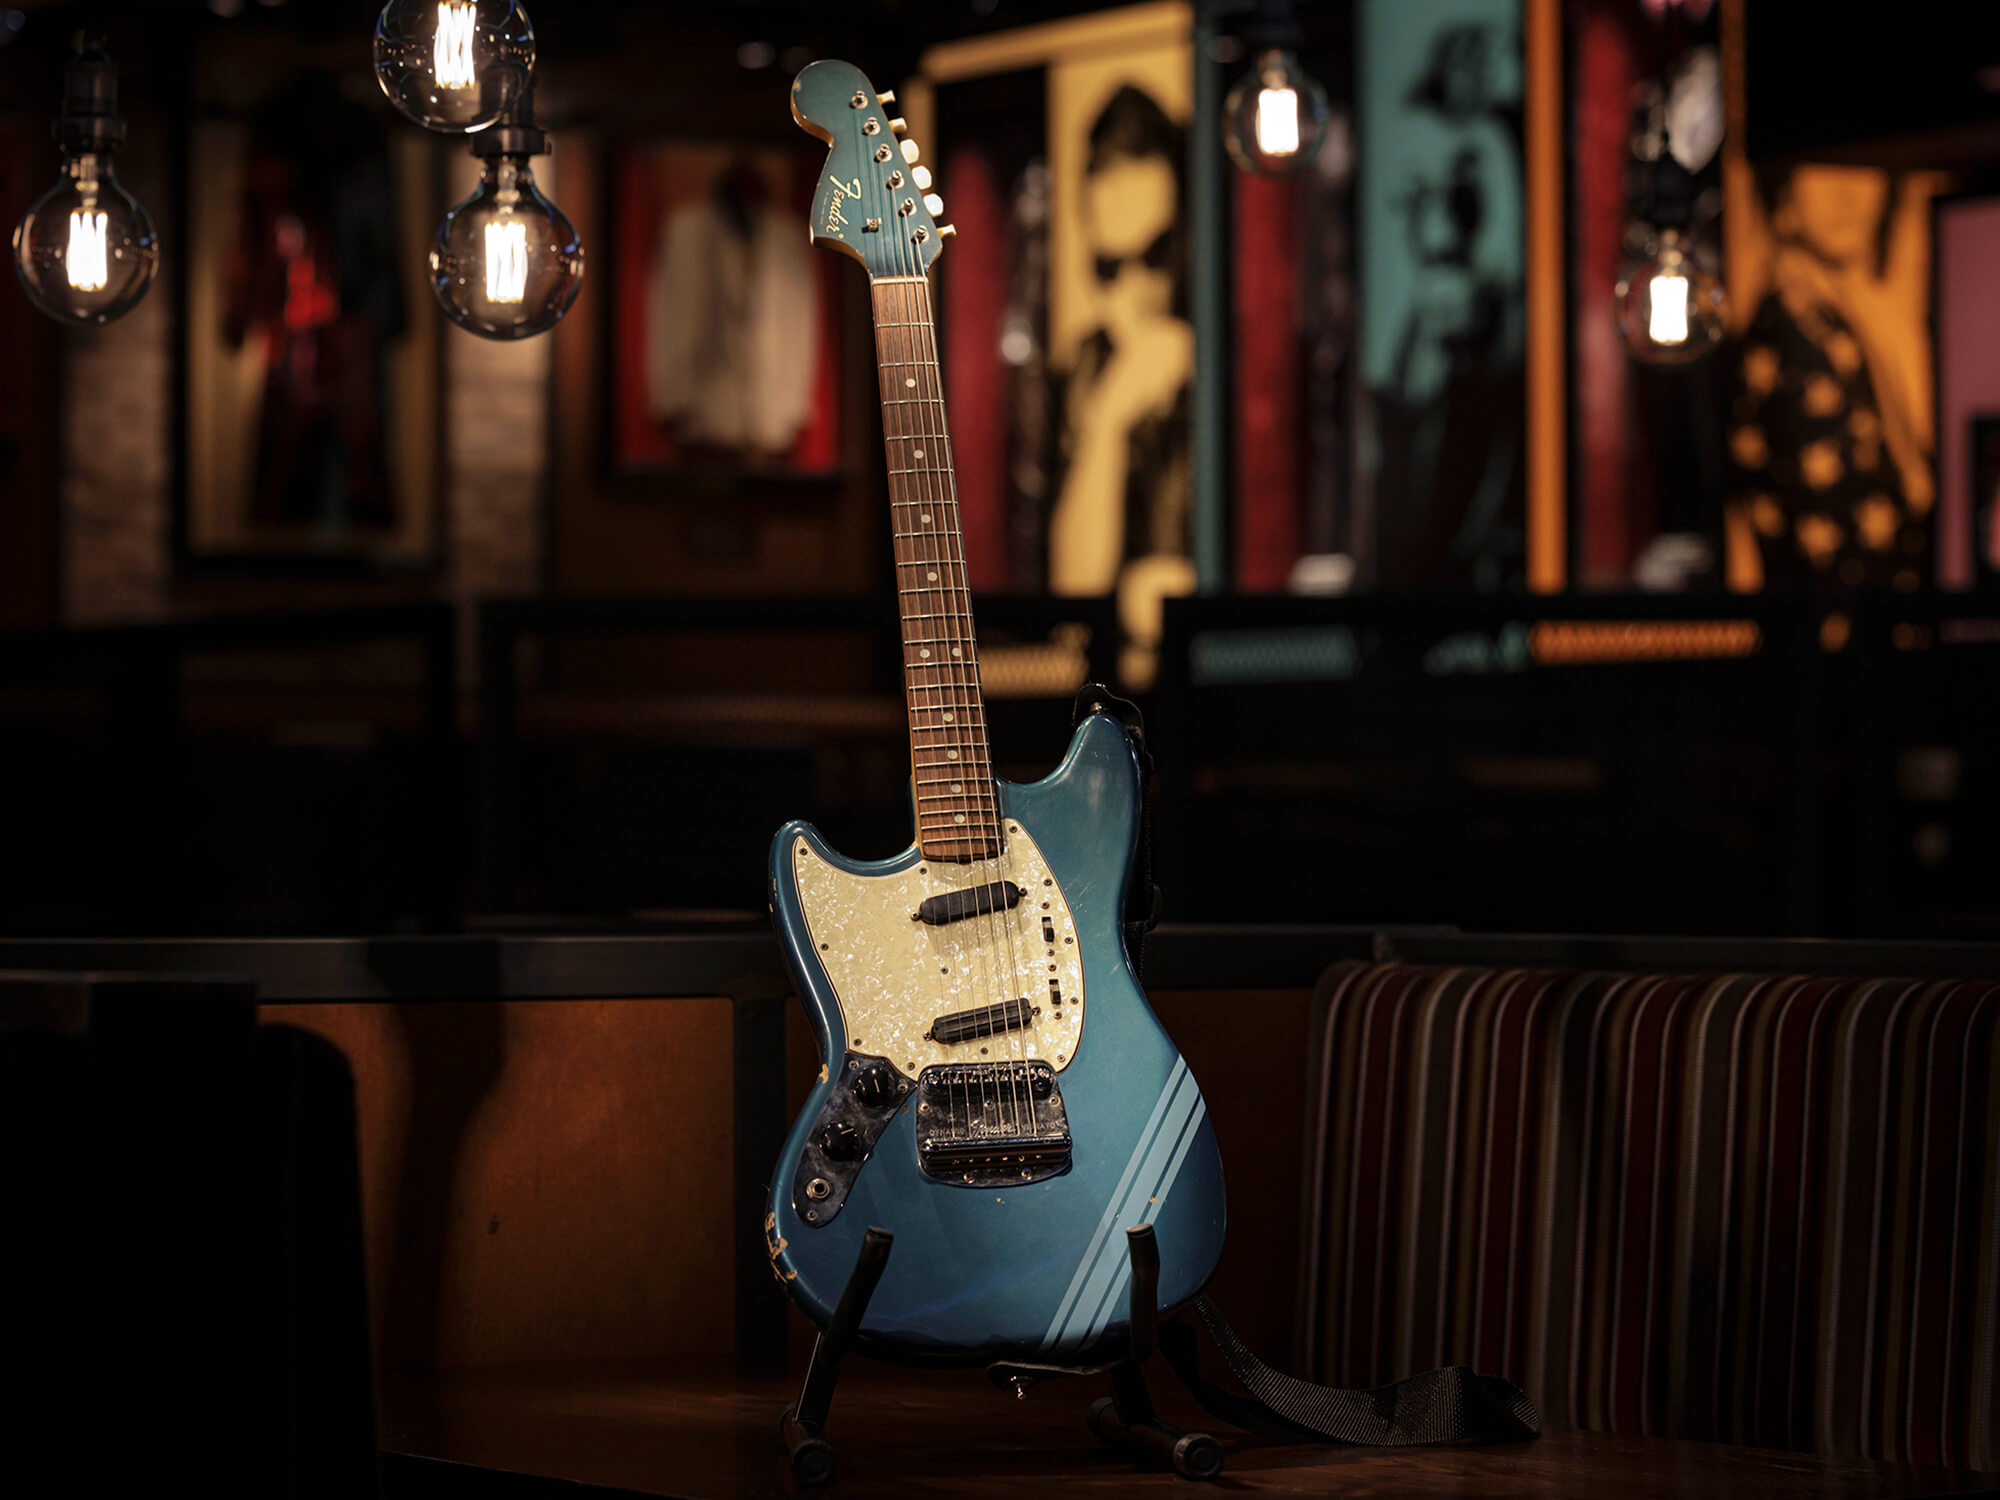 The Fender Mustang used by Kurt Cobain in the ‘Smells Like Teen Spirit’ music video on display at Hard Rock Cafe in Piccadilly Circus, 2022, photo by Rob Pinney/Getty Images